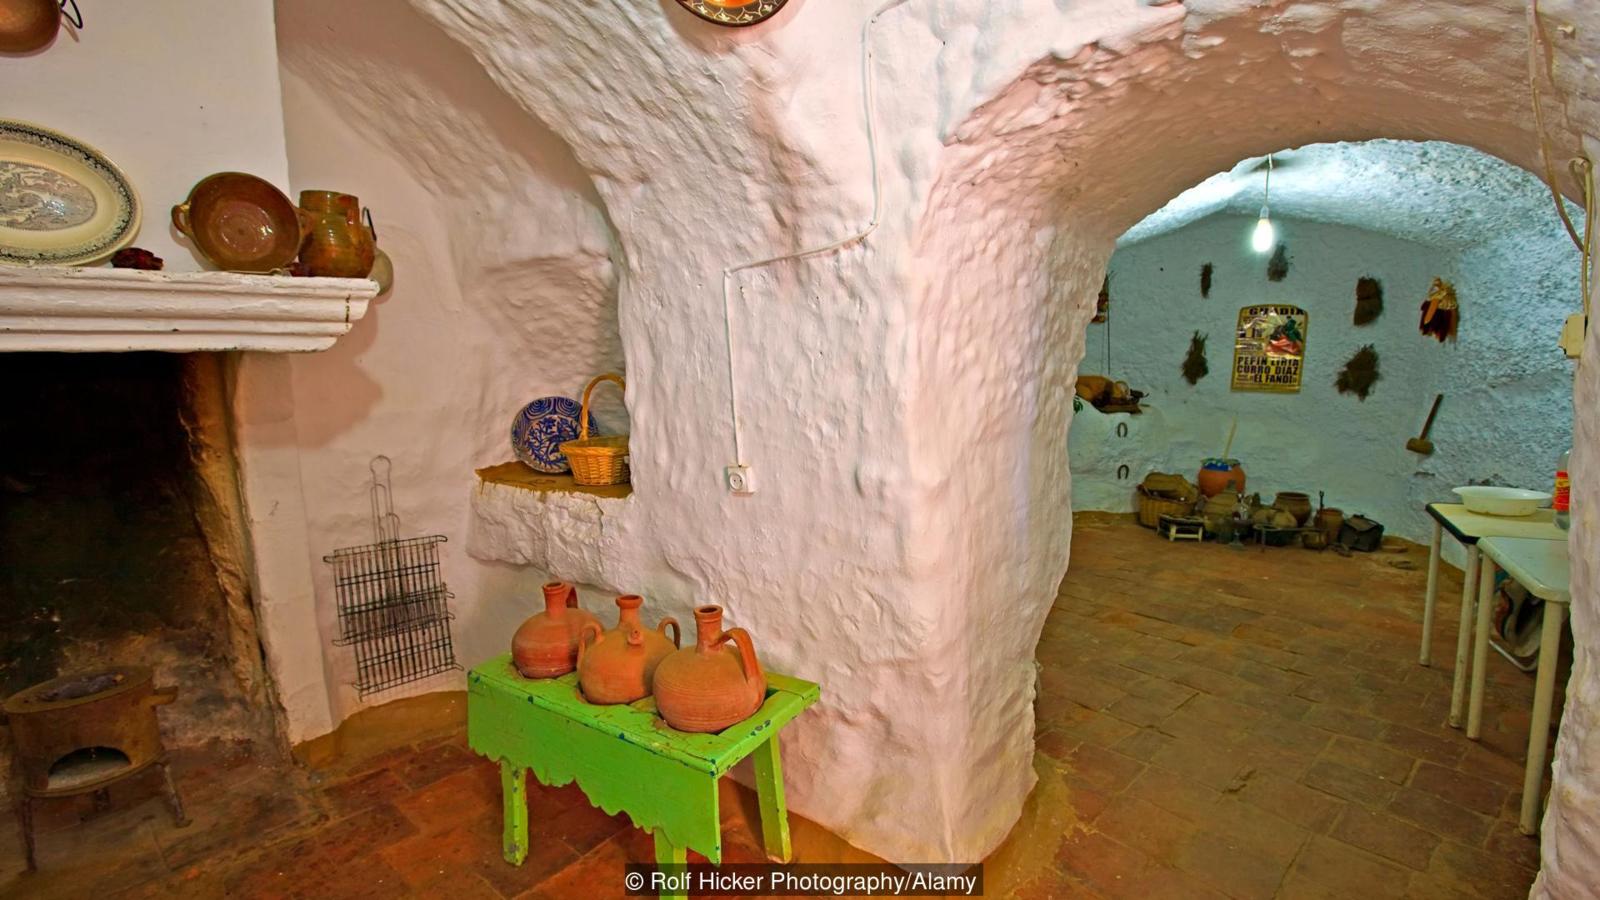 Interior of a cave dwelling in the town of Guadix, Province of Granada, Andalusia (Andalucia), Spain, Europe.